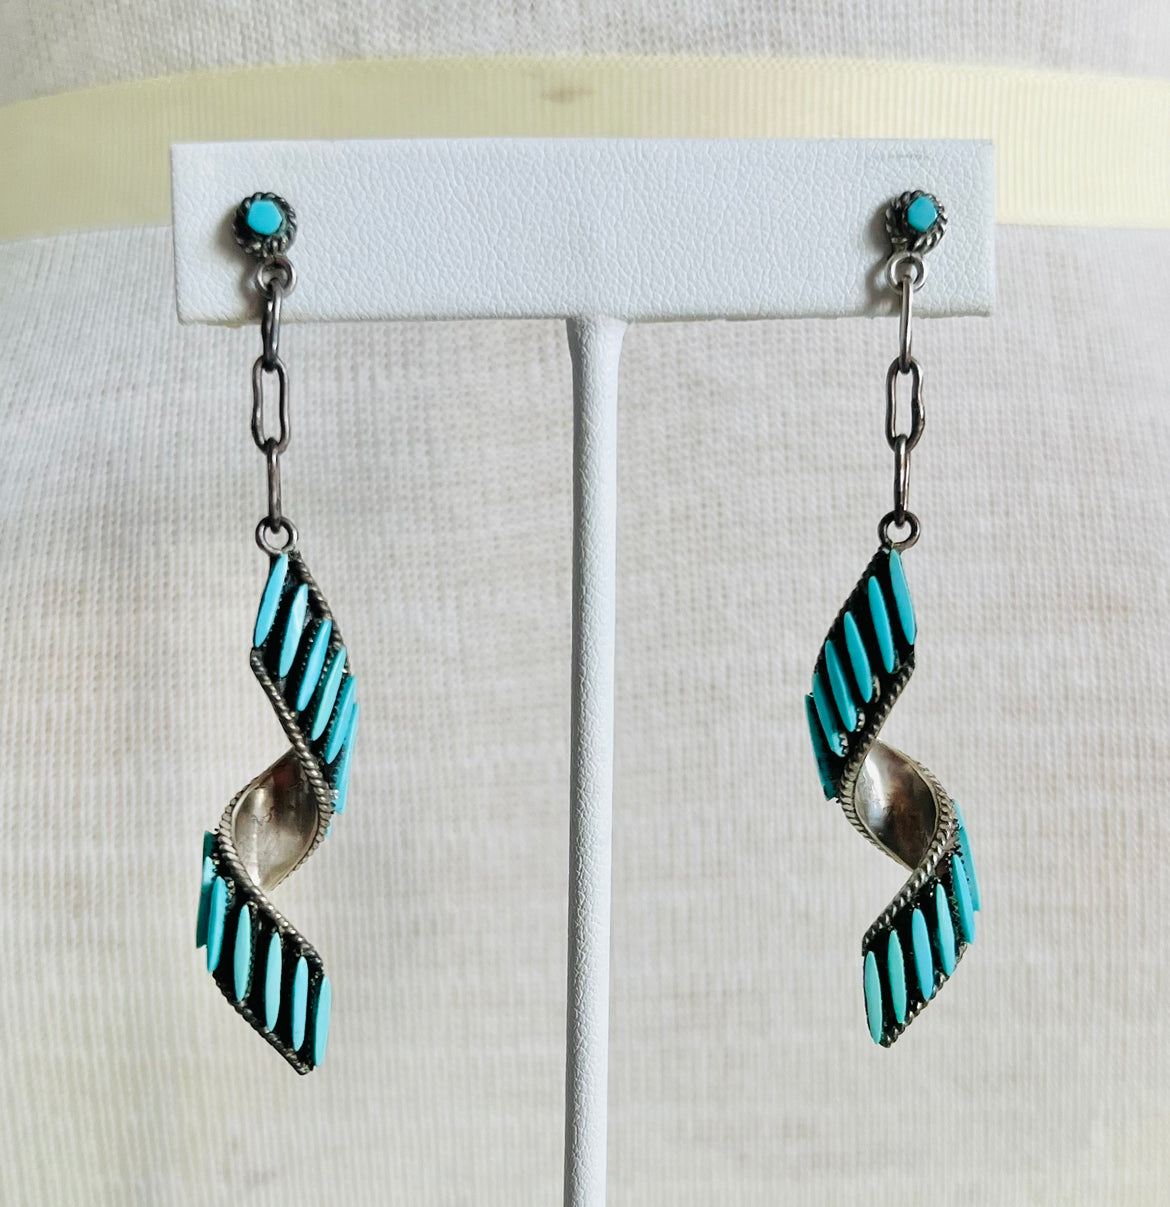 Vintage 1970s Petit Point Zuni Turquoise Sterling Silver Spiral Earrings